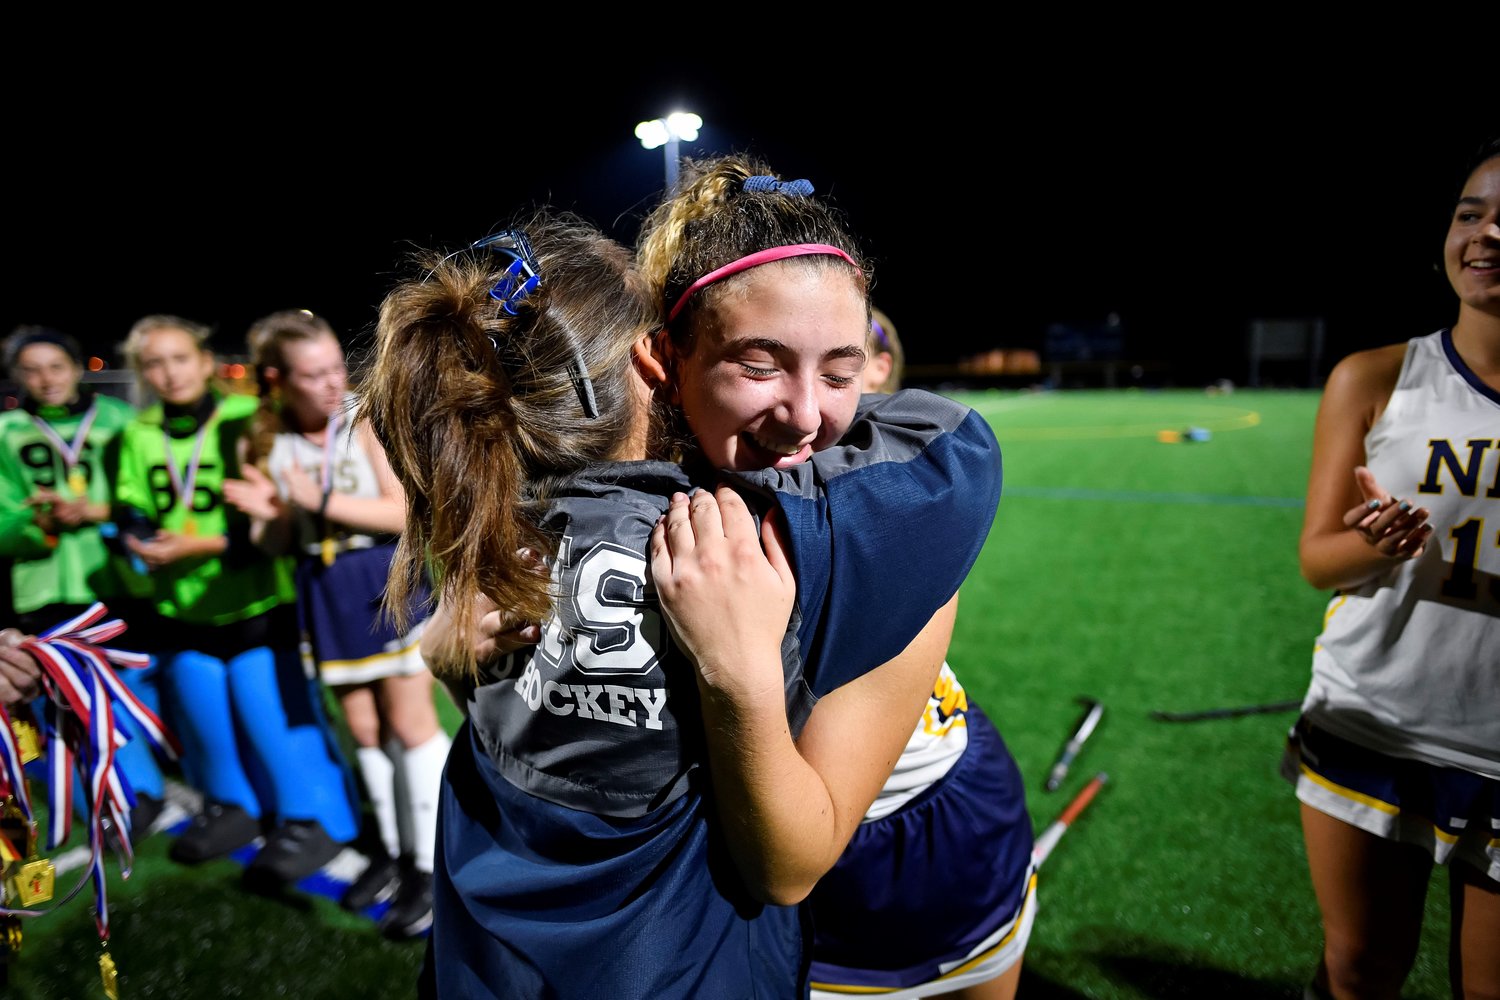 New Hope-Solebury coach Gwen Smith gets a hug from Lauren Trenti as the medals are handed out.